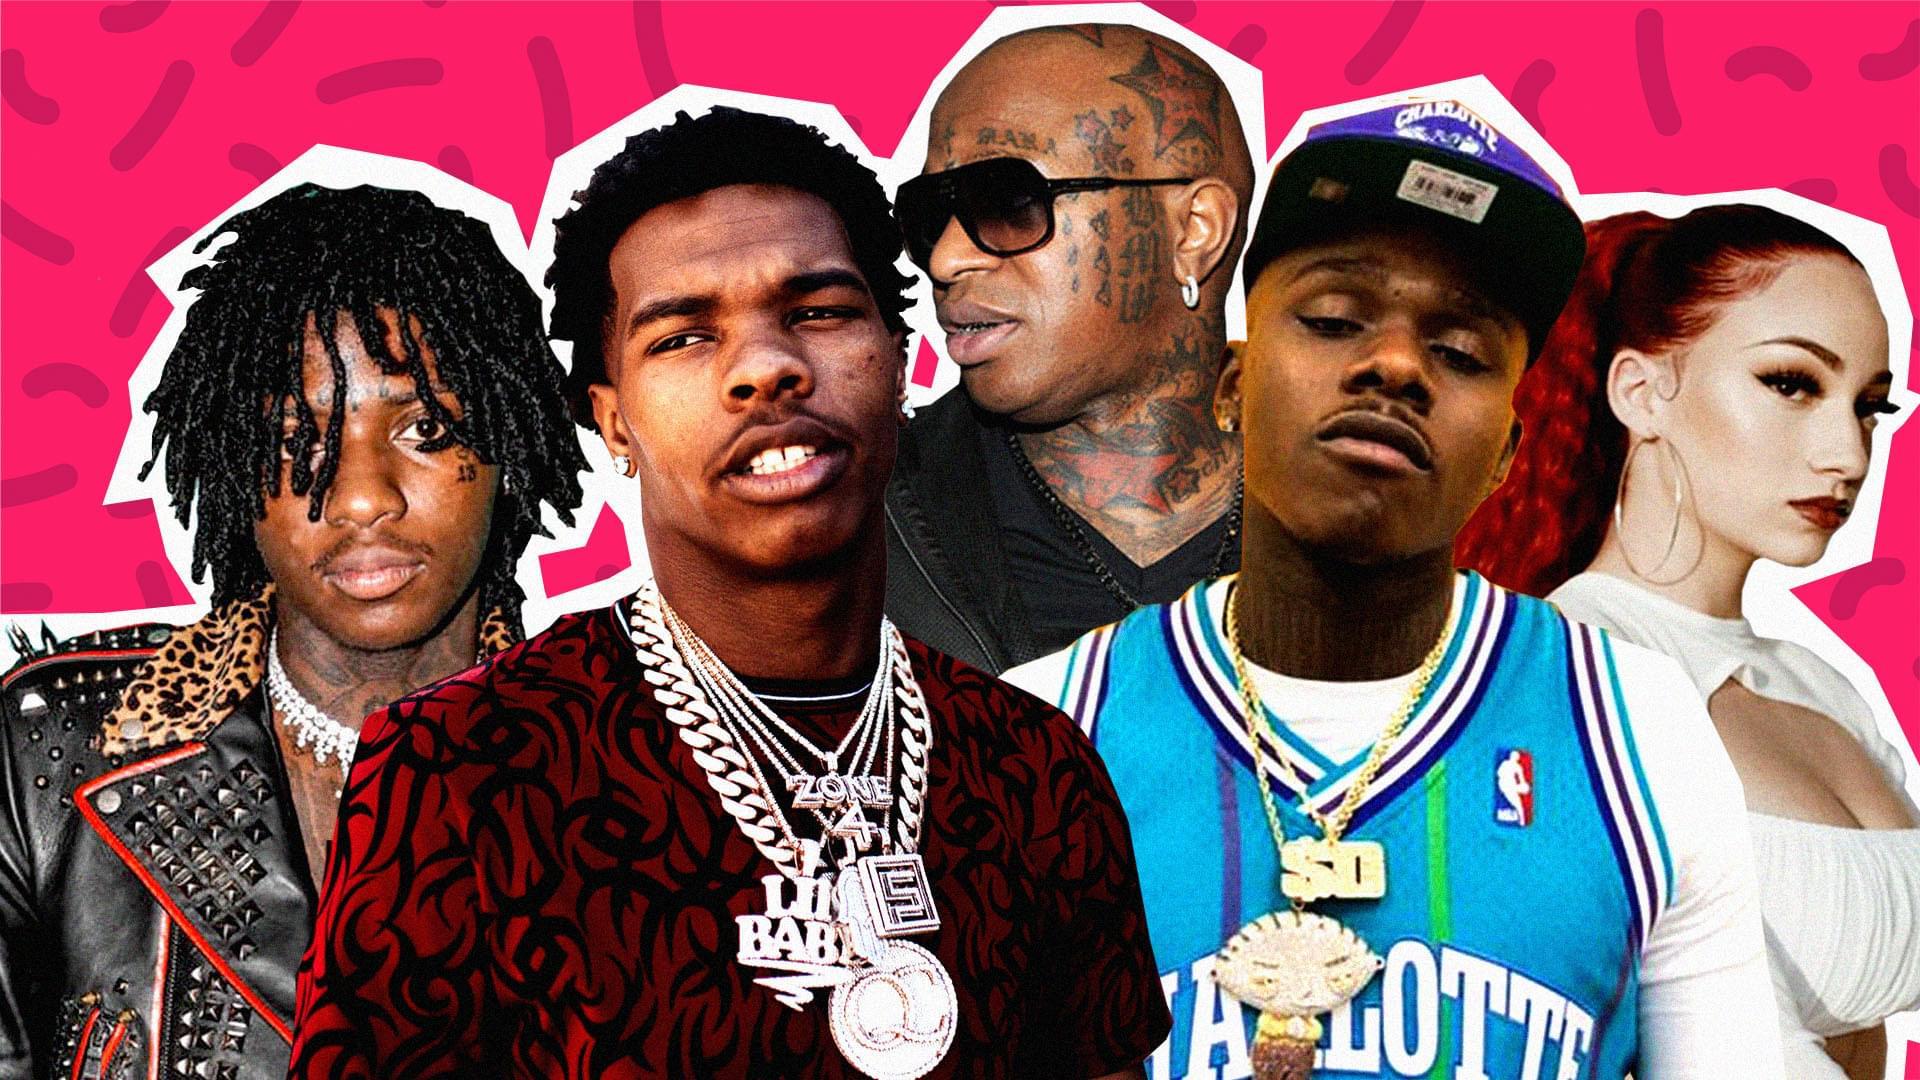 A History Of “Baby” Rappers